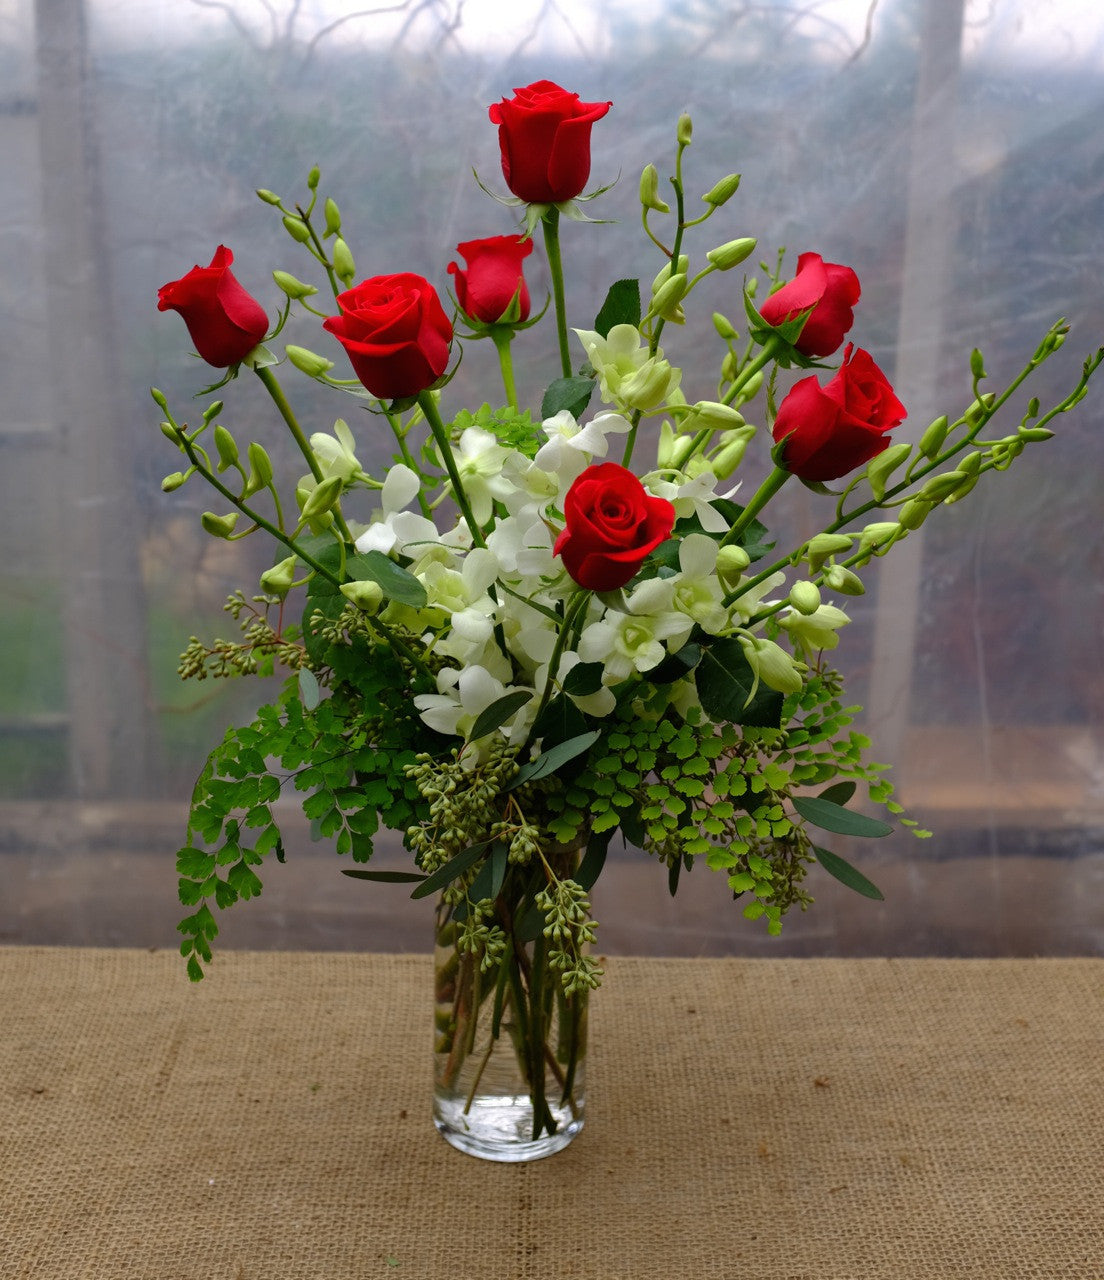 Red roses and white dendrobium orchids designed in a vase by Michler's Florist in Lexington, KY